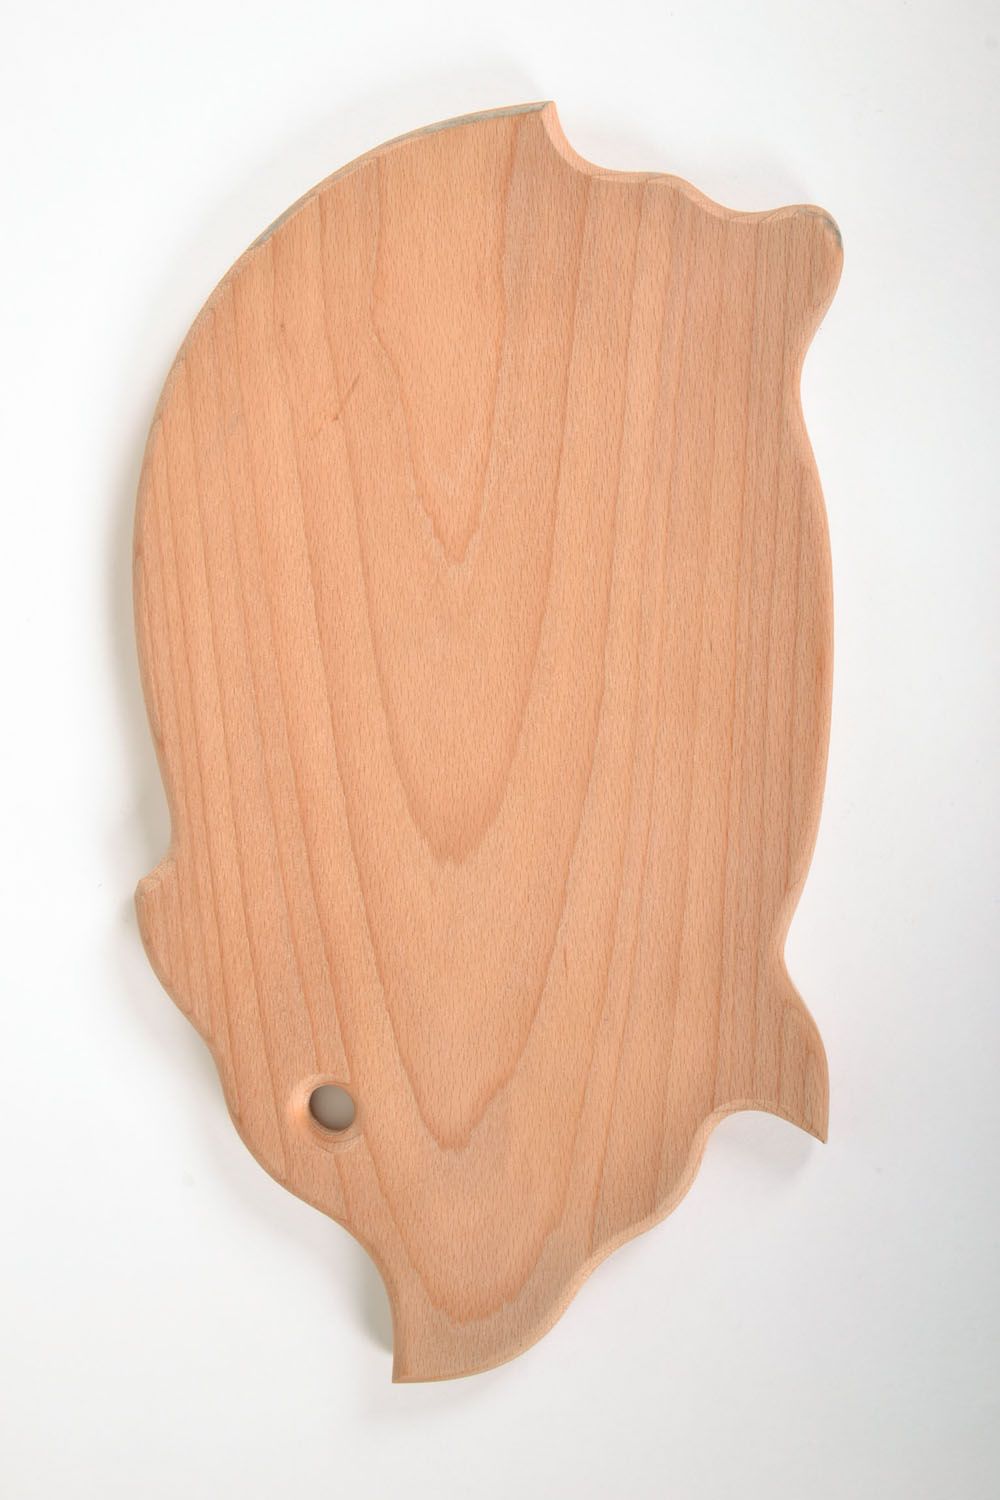 Chopping board in the shape of pig photo 4